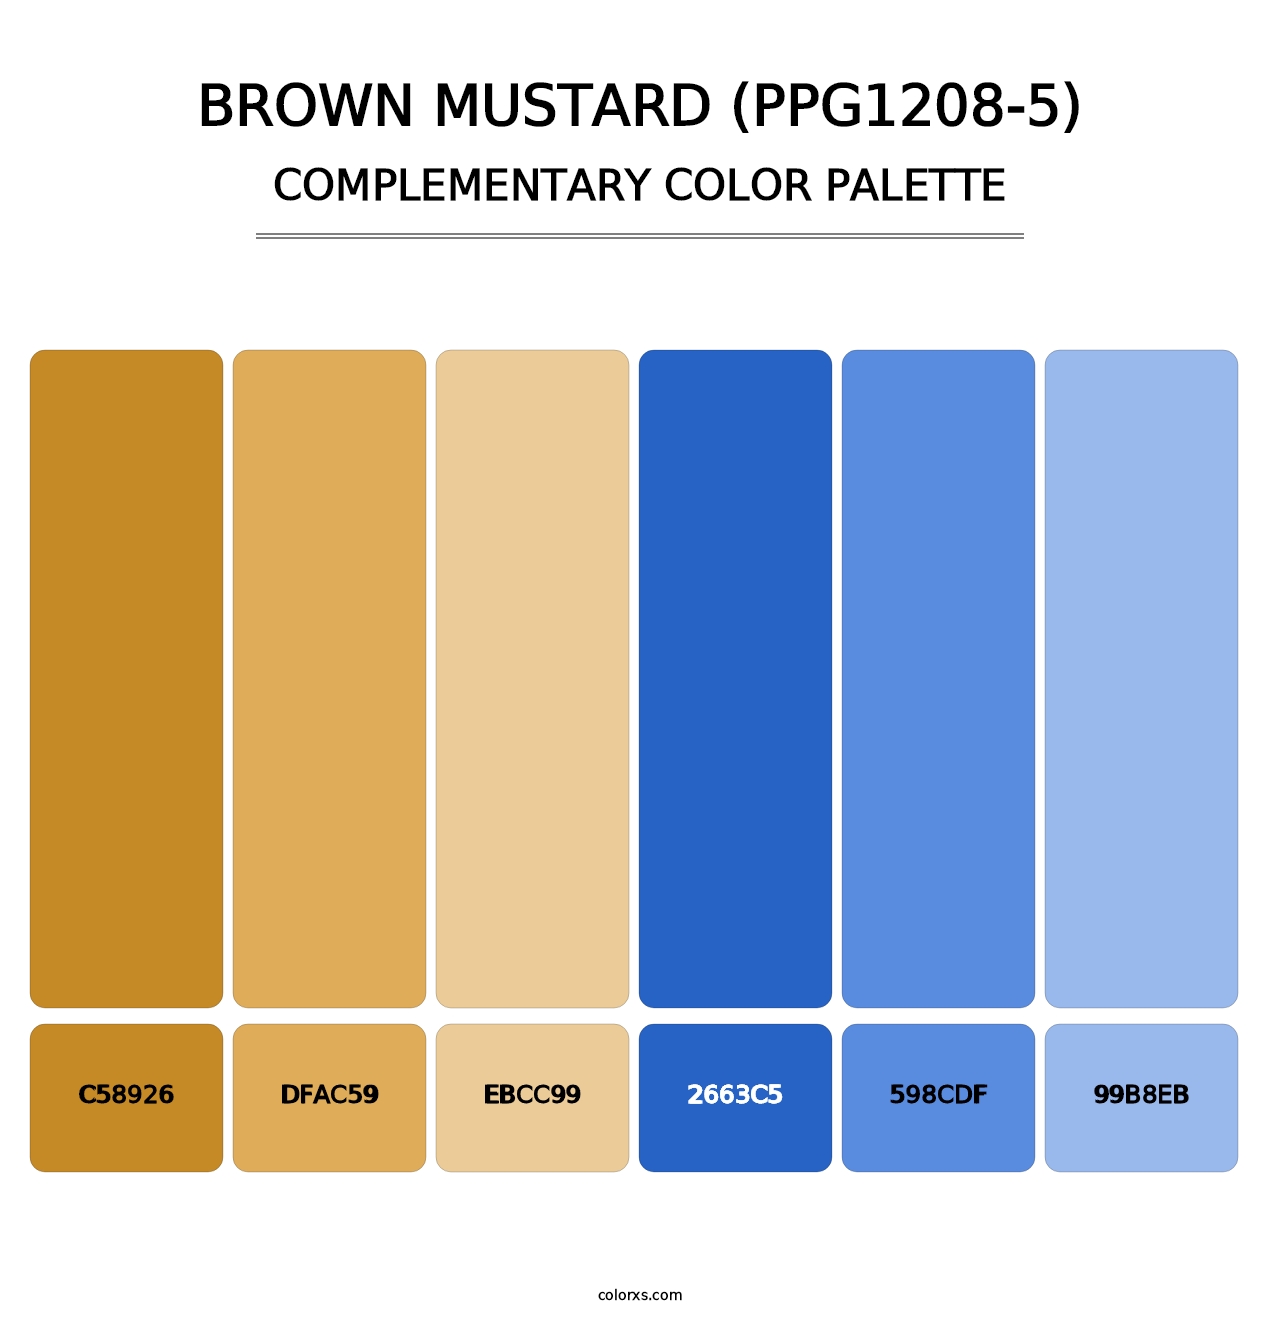 Brown Mustard (PPG1208-5) - Complementary Color Palette